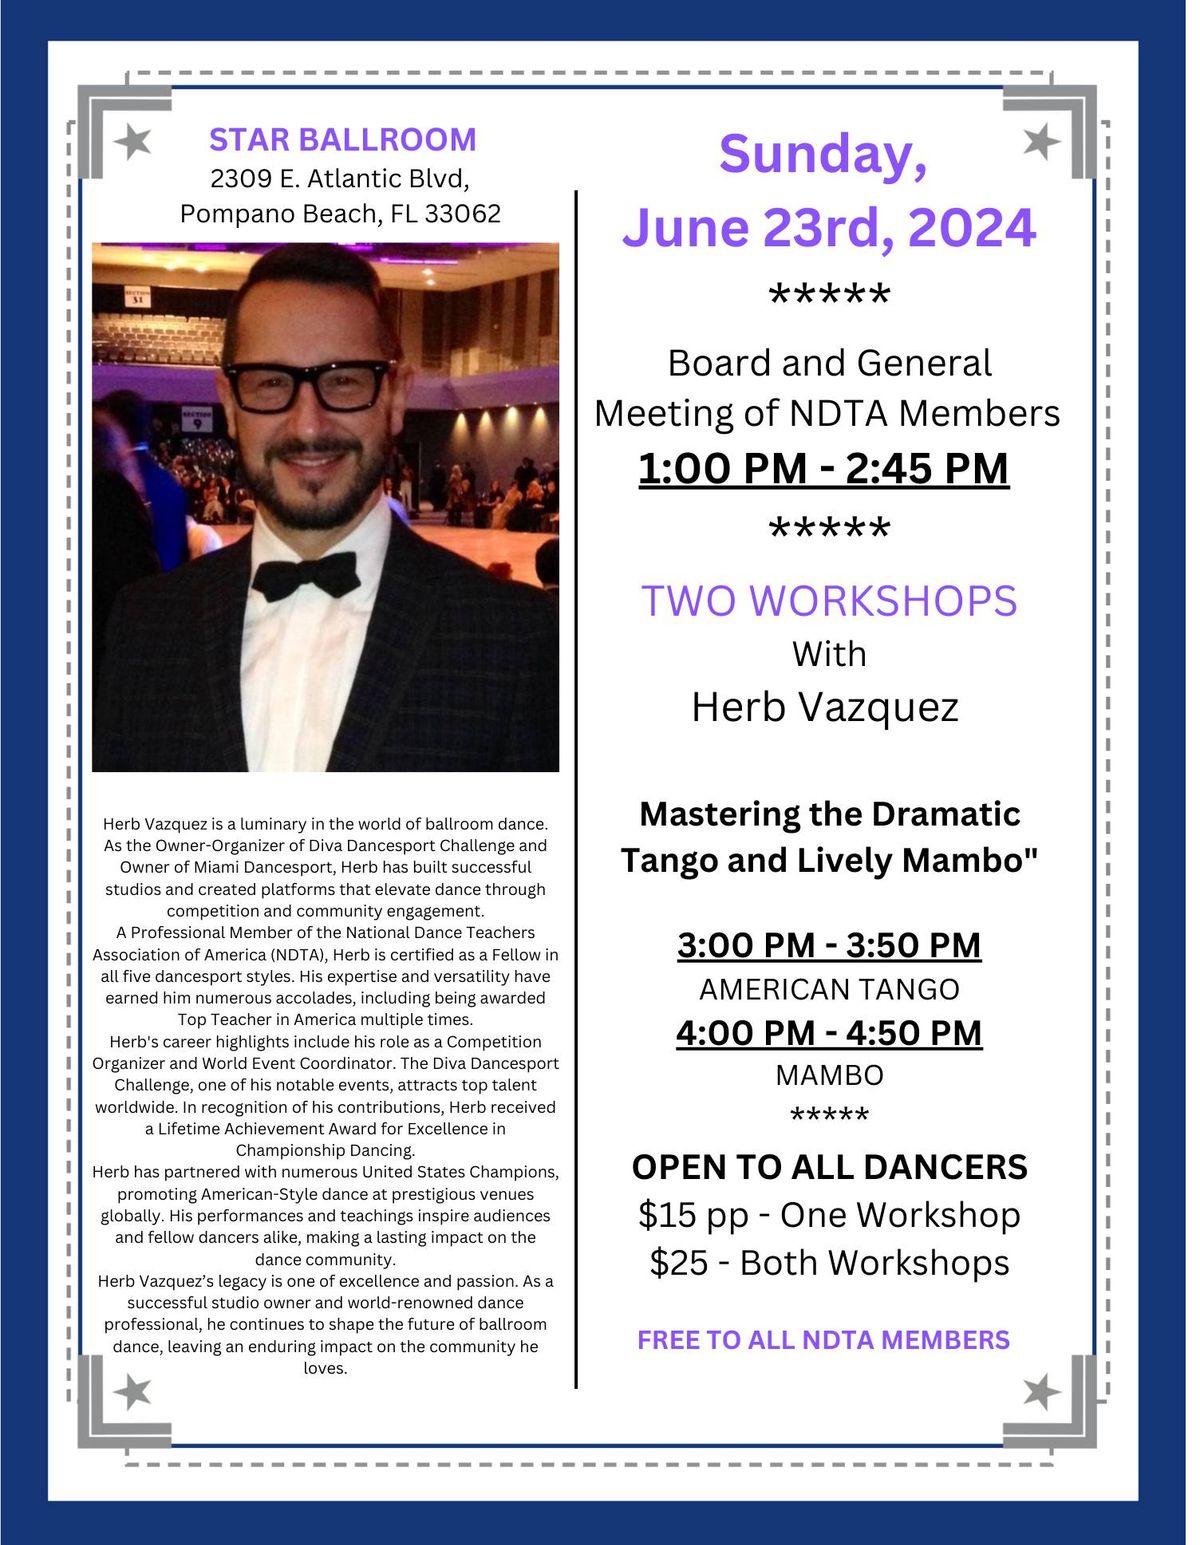 Join Us for an Exclusive Workshop with Herb Vazquez at the NDTA Meeting on June 23rd!